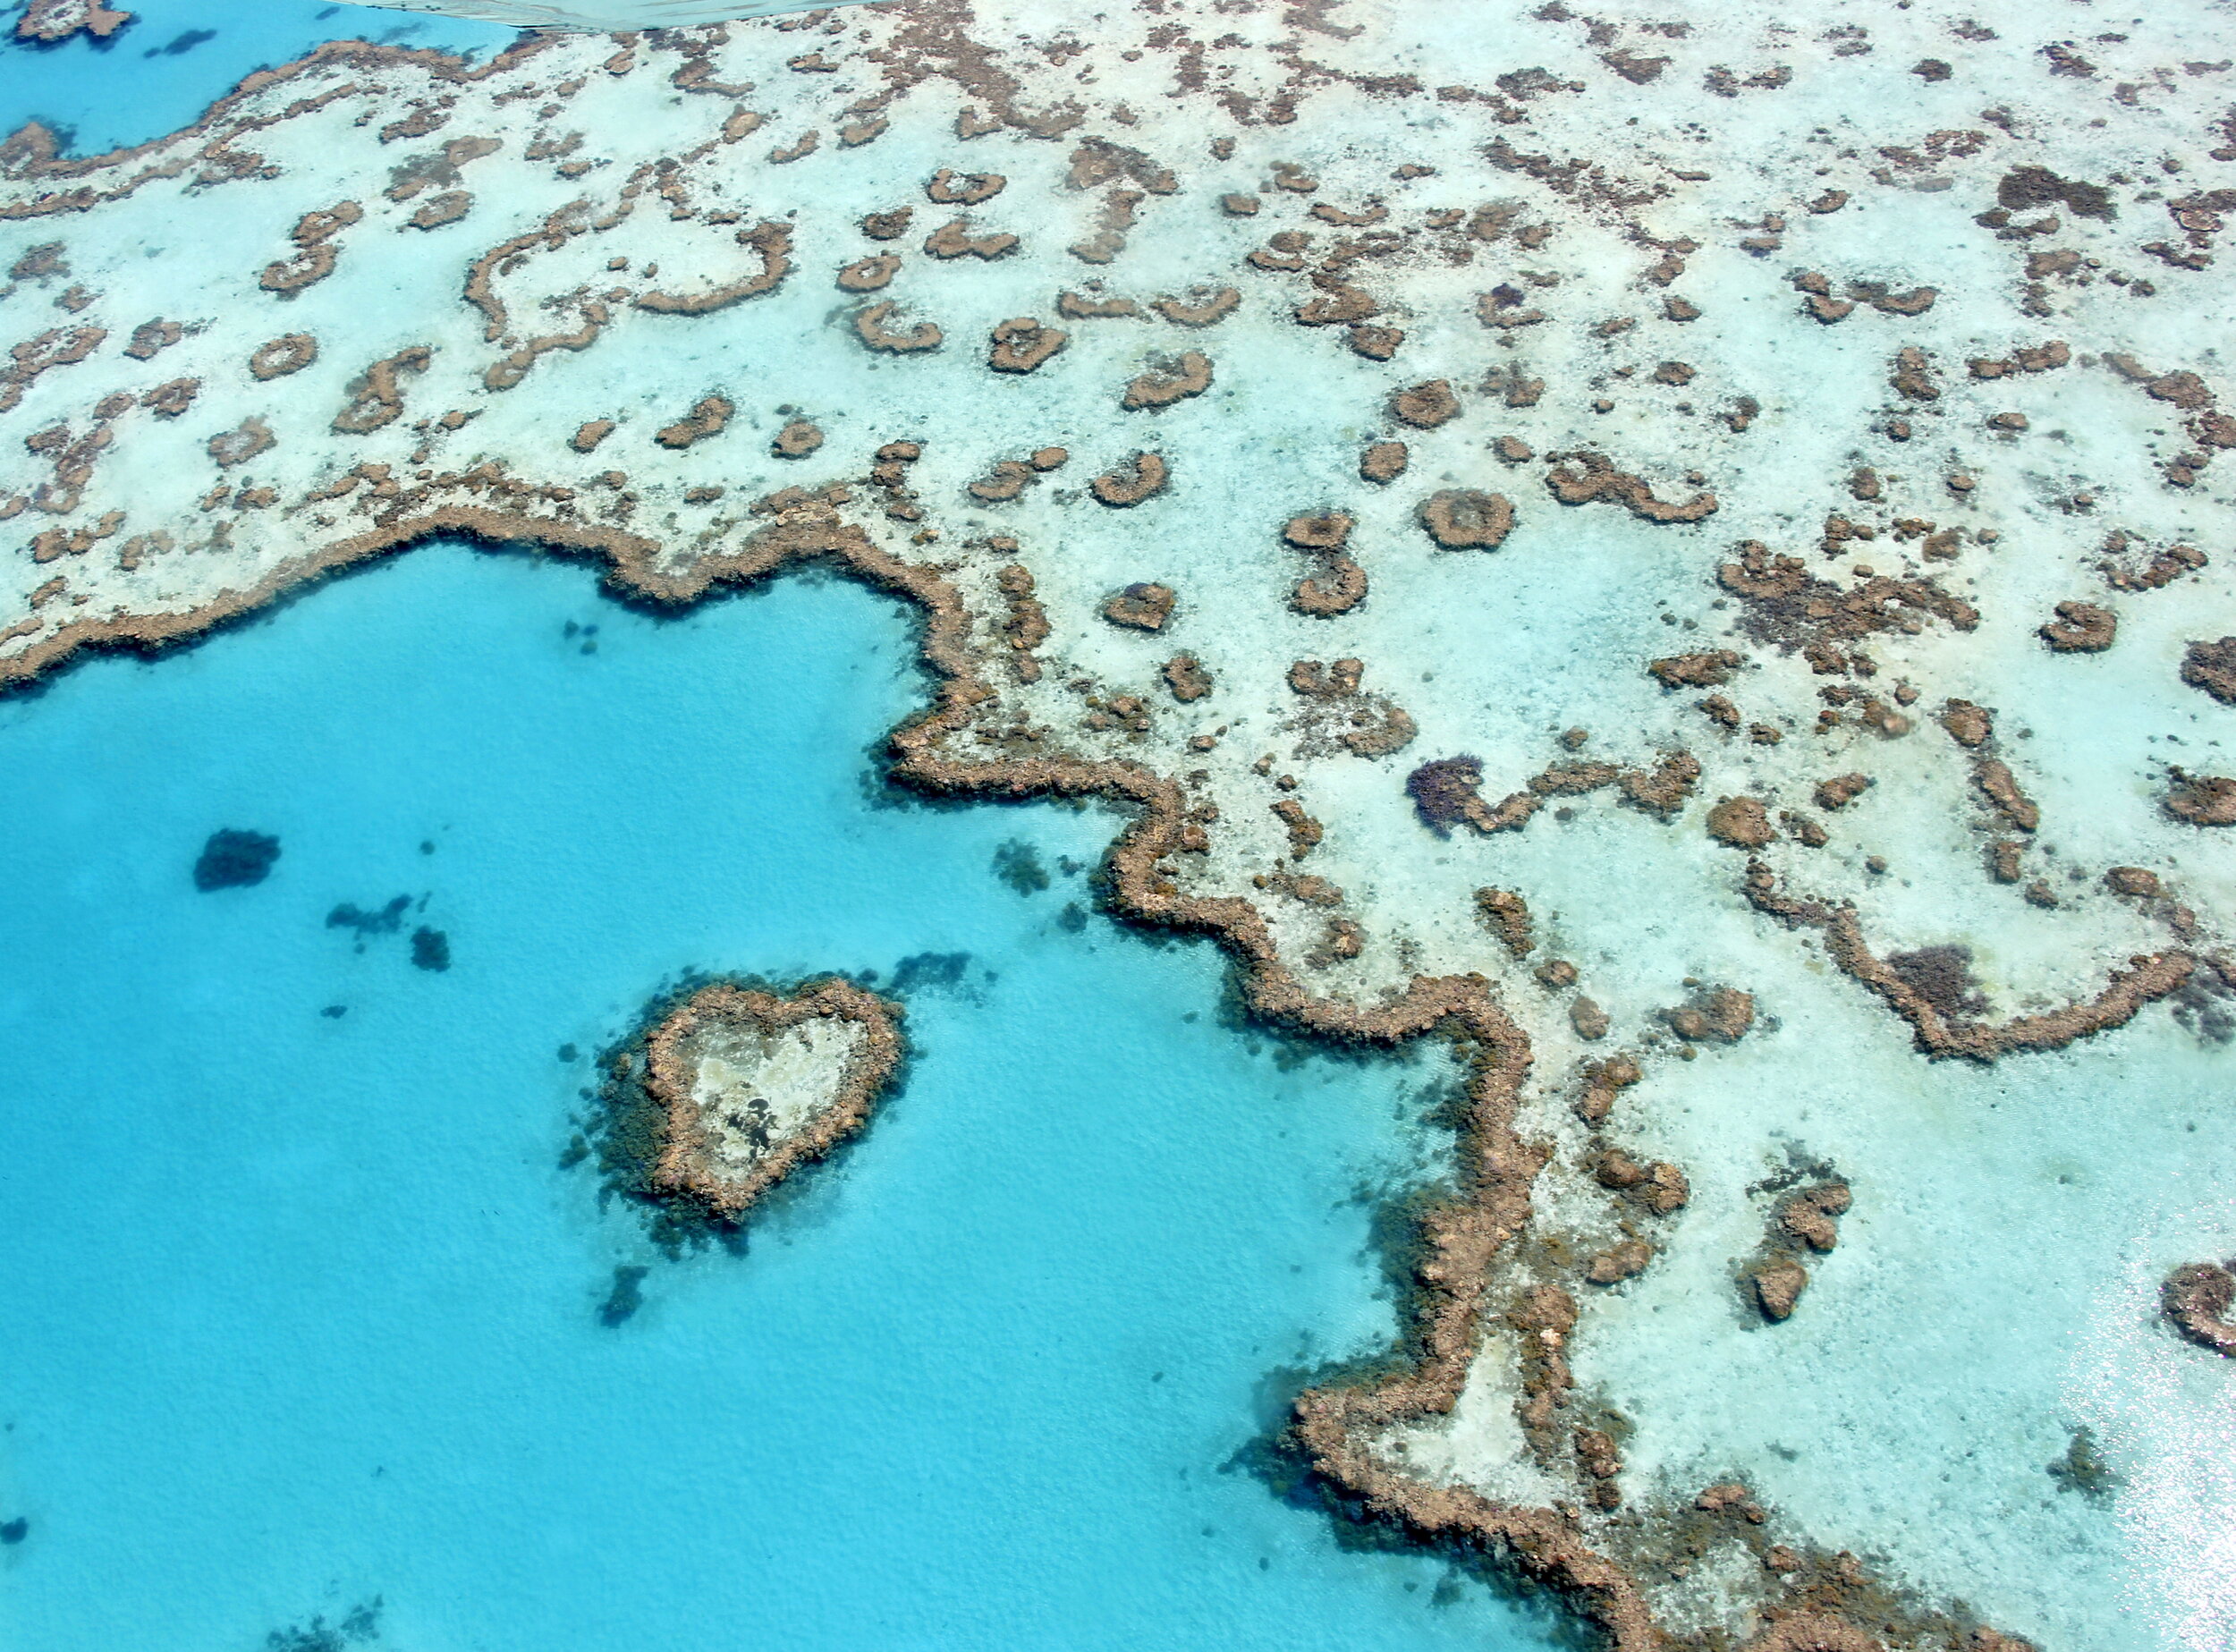 The_heart_reef,_part_of_the_Great_Barrier_Reef_near_Airlie_Beach,_Whitsunday_Islands,_Queensland.jpg